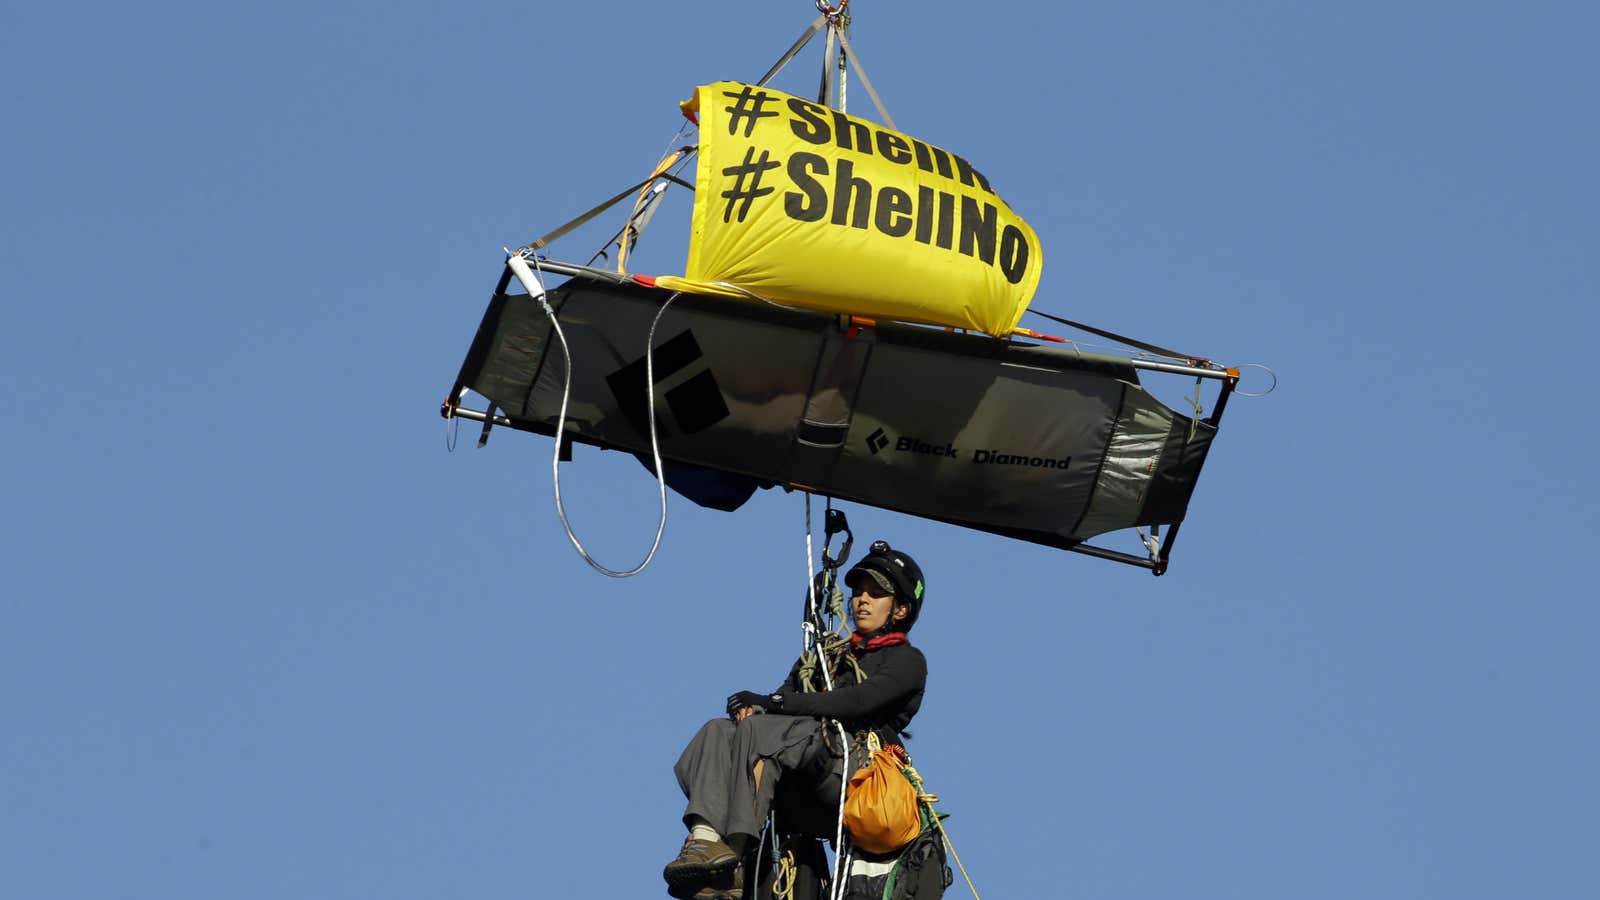 Activists were creative against Shell.